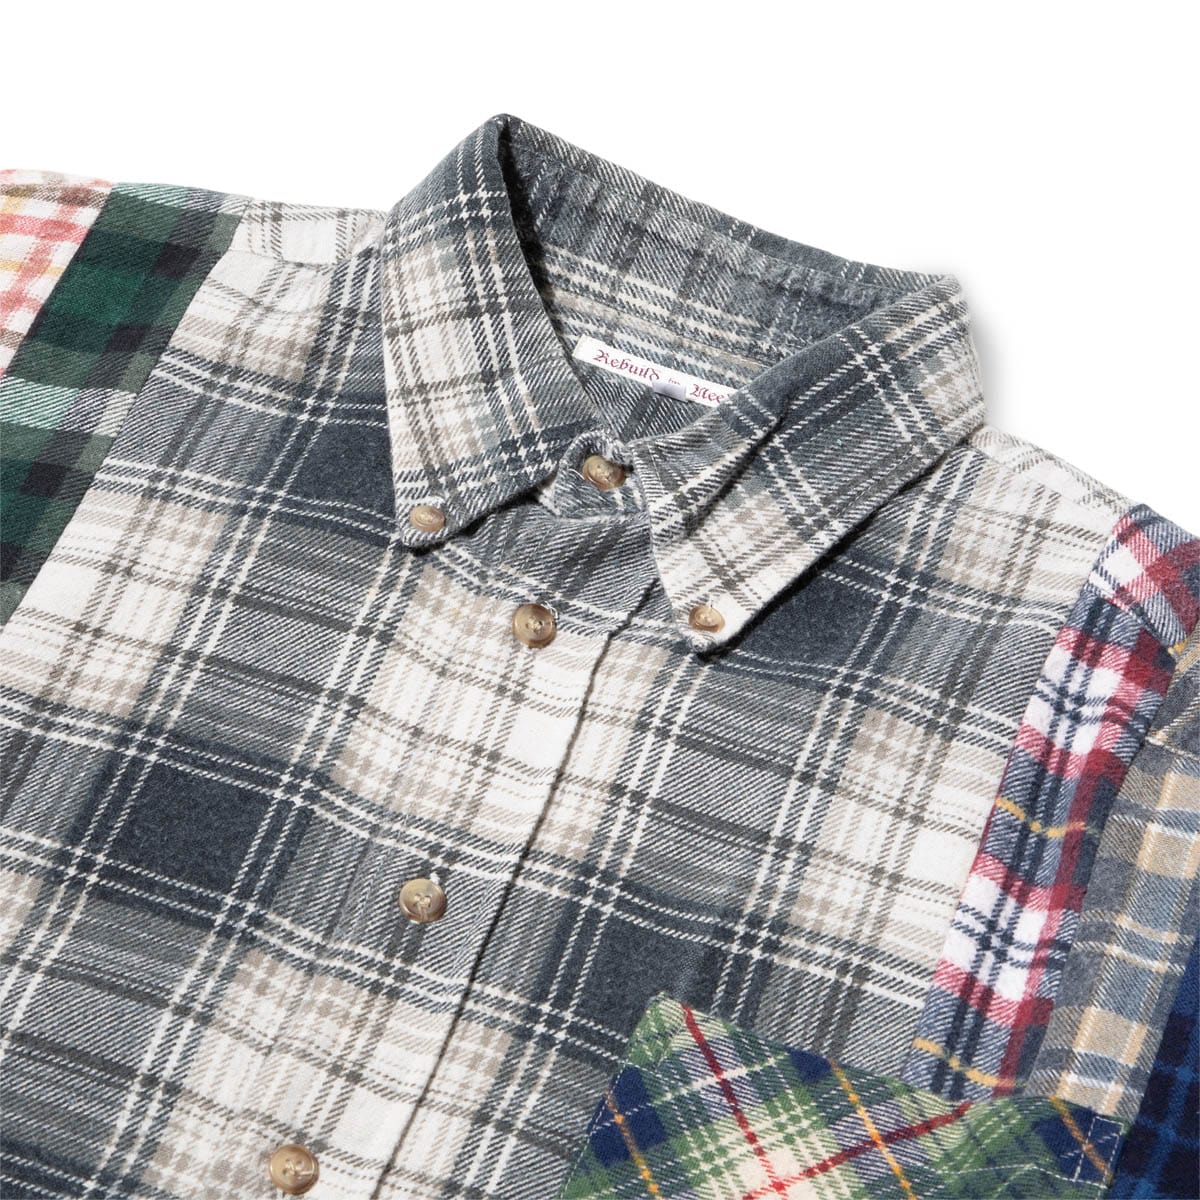 Needles Shirts ASSORTED / M 7 CUTS FLANNEL SHIRT SS21 6